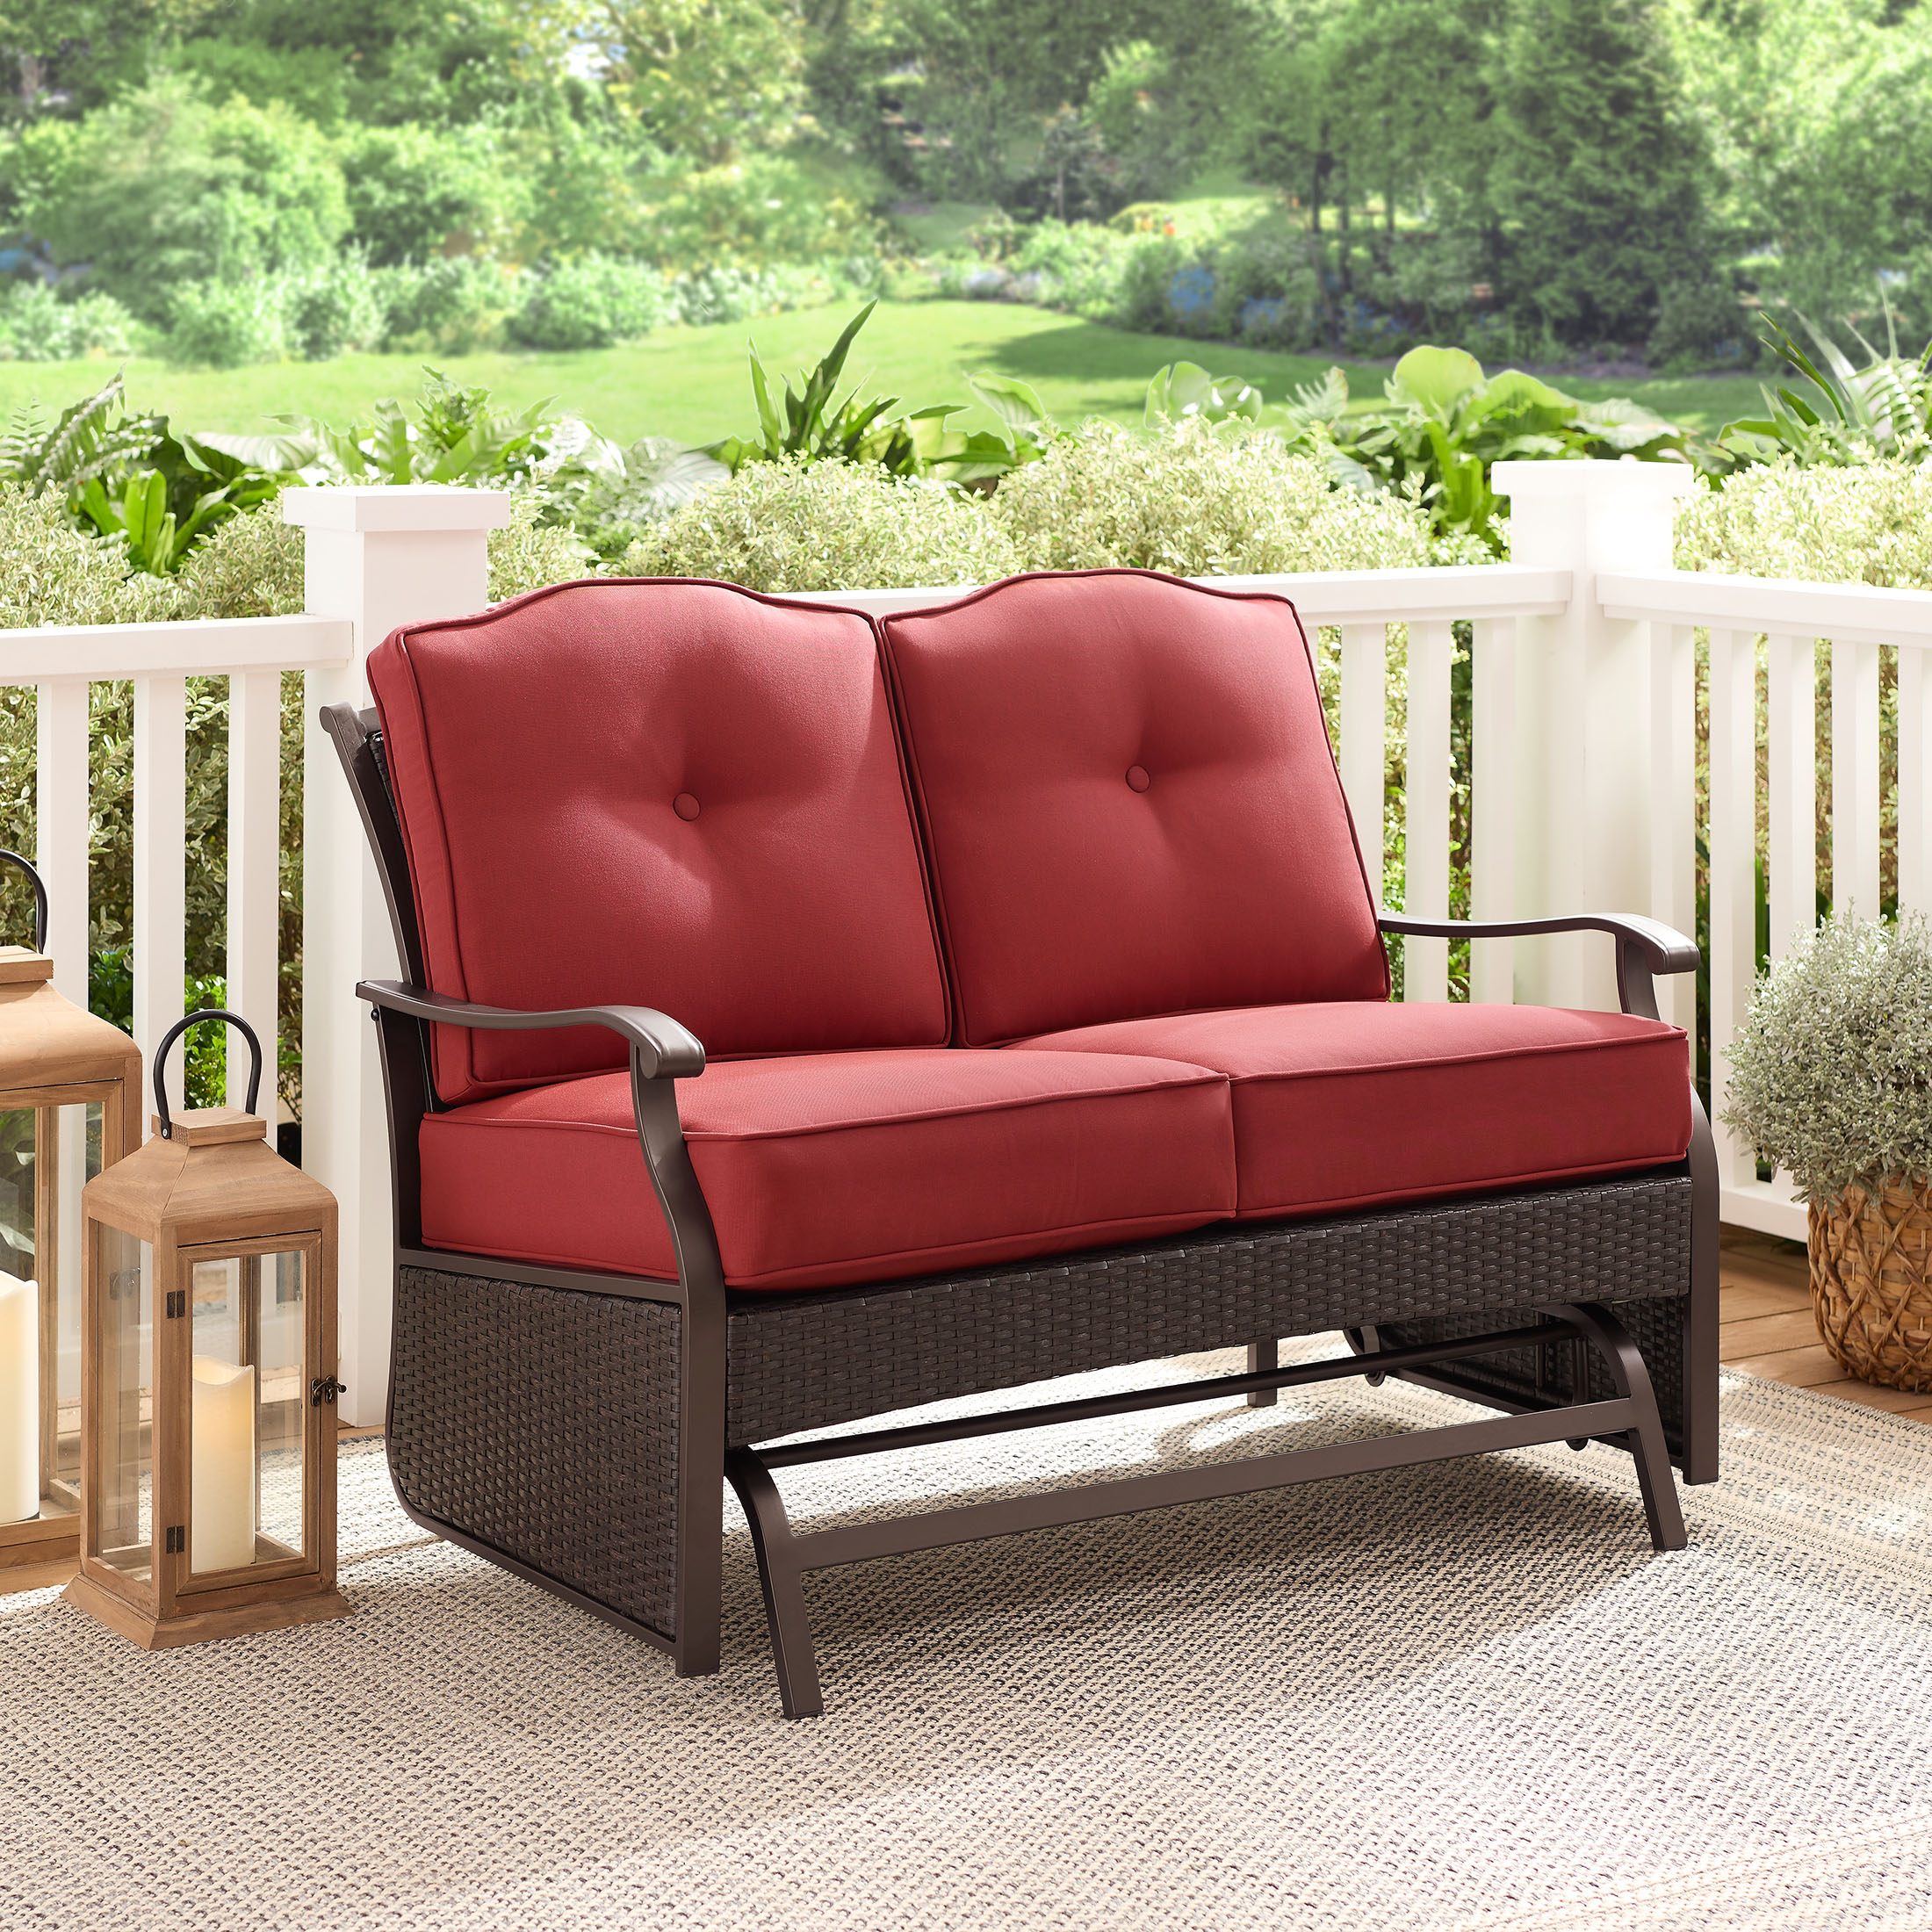 Better Homes & Gardens Providence Steel Outdoor Glider Loveseat - Red - image 1 of 6